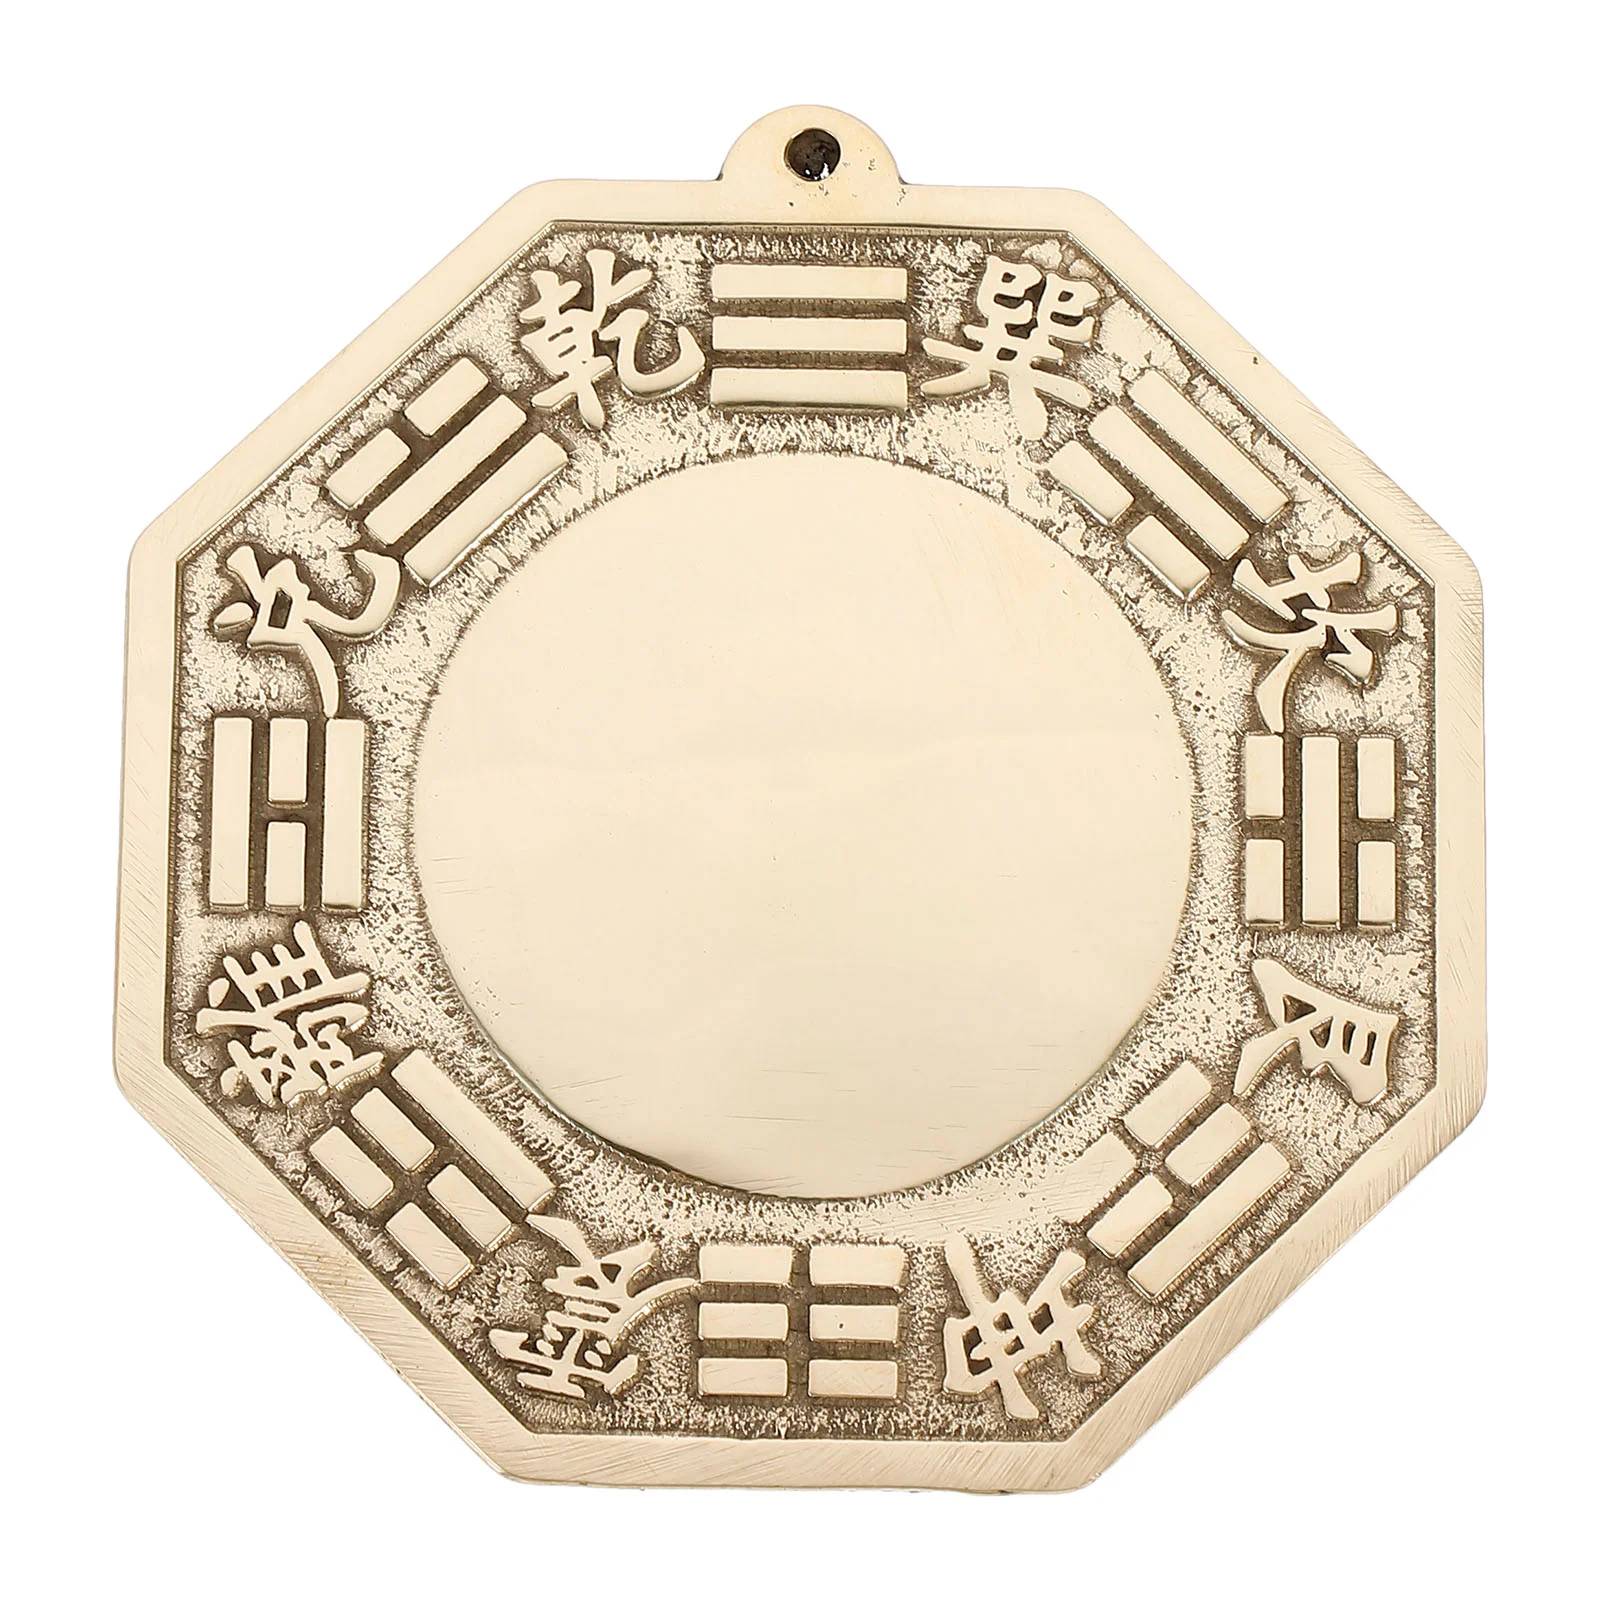 

Mirror Bagua Chineseconcave Brass Convex Gossip Protection Luck Ornament Good Year Decor Fengshui Octagon Doorgifts Crafts Lucky